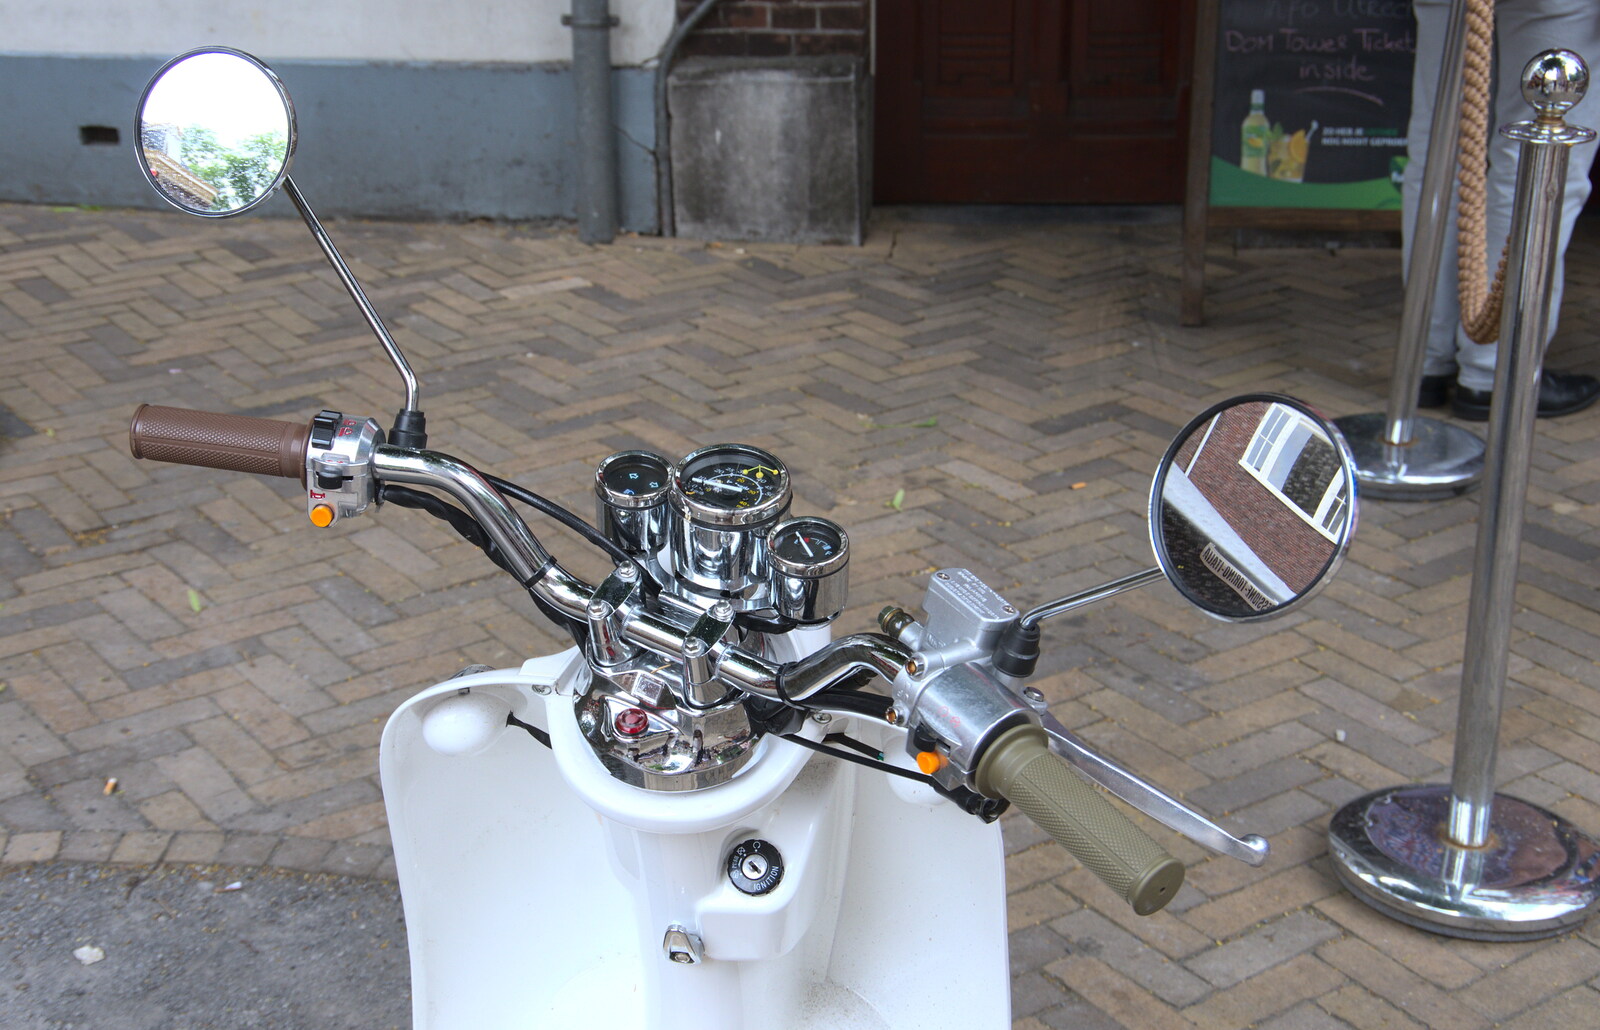 Shiny chrome on a moped from A Postcard from Utrecht, Nederlands - 10th June 2018